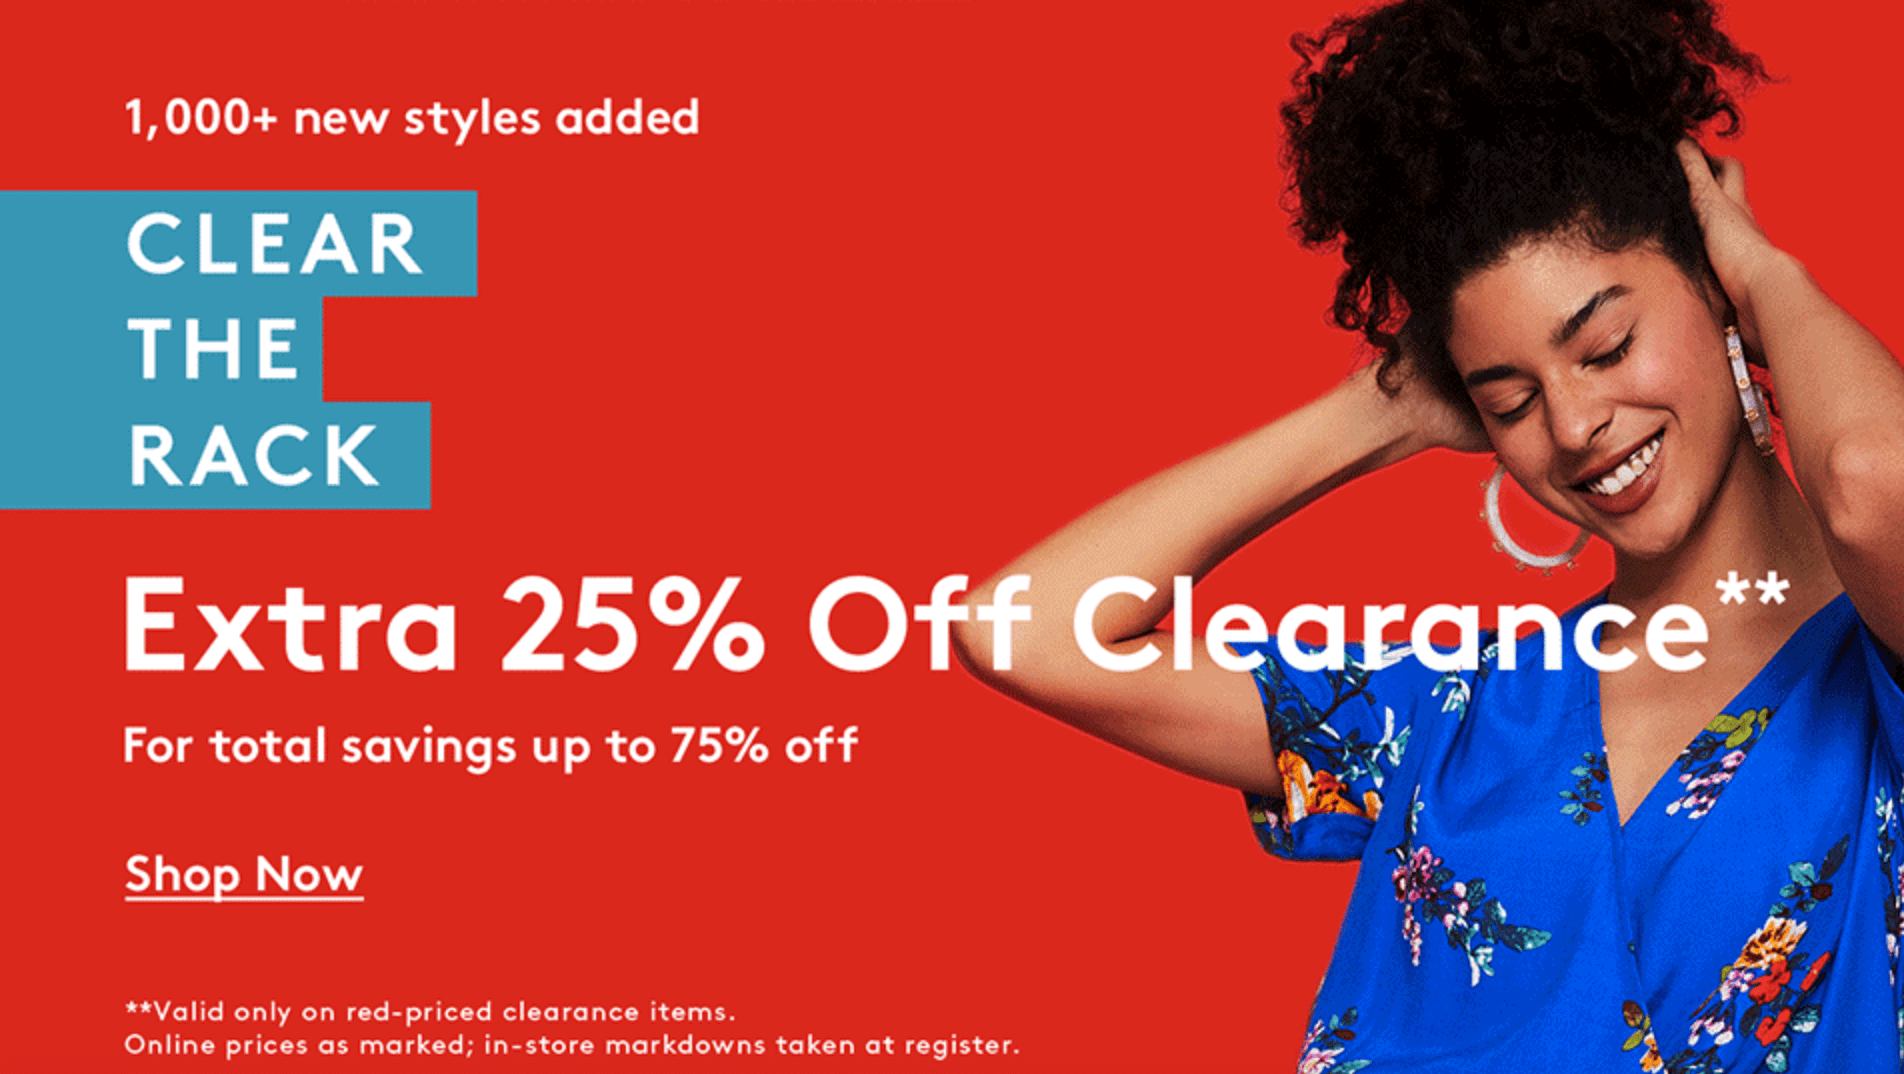 Up to 97% Off Clearance Sale + Extra 25% Off at Nordstrom Rack